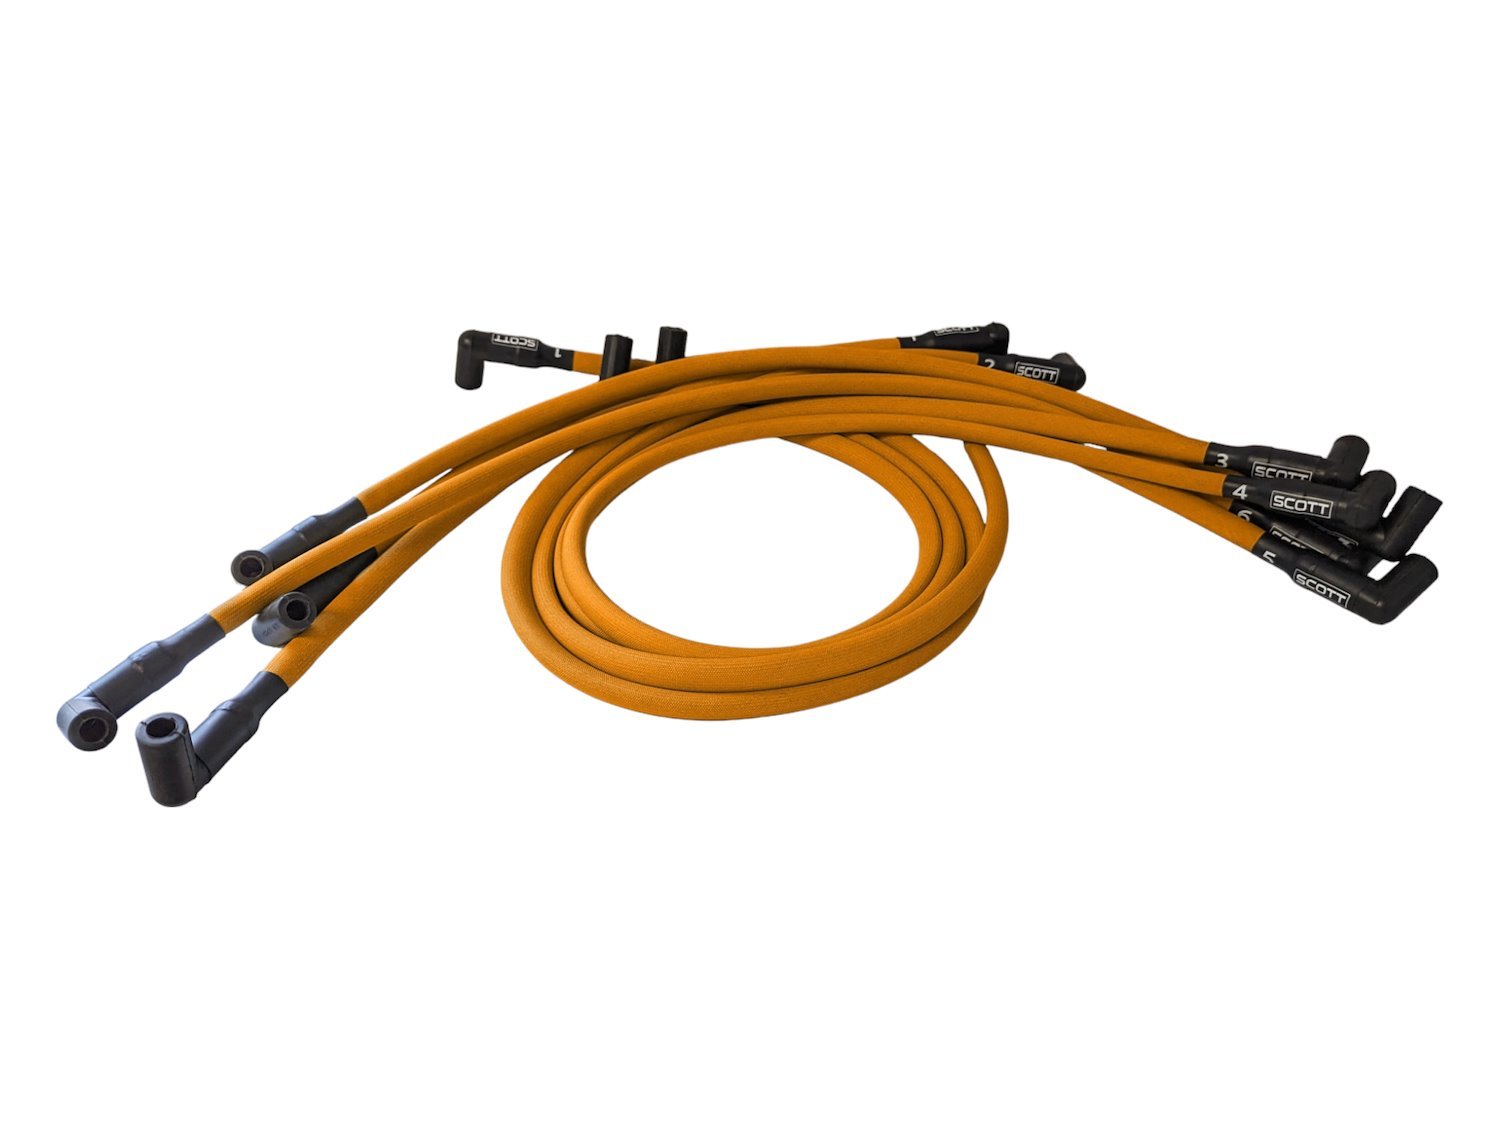 SPW-PS-516-6 High-Performance Fiberglass-Oversleeved Spark Plug Wire Set for Big Block Chevy Dragster, Under Header [Orange]